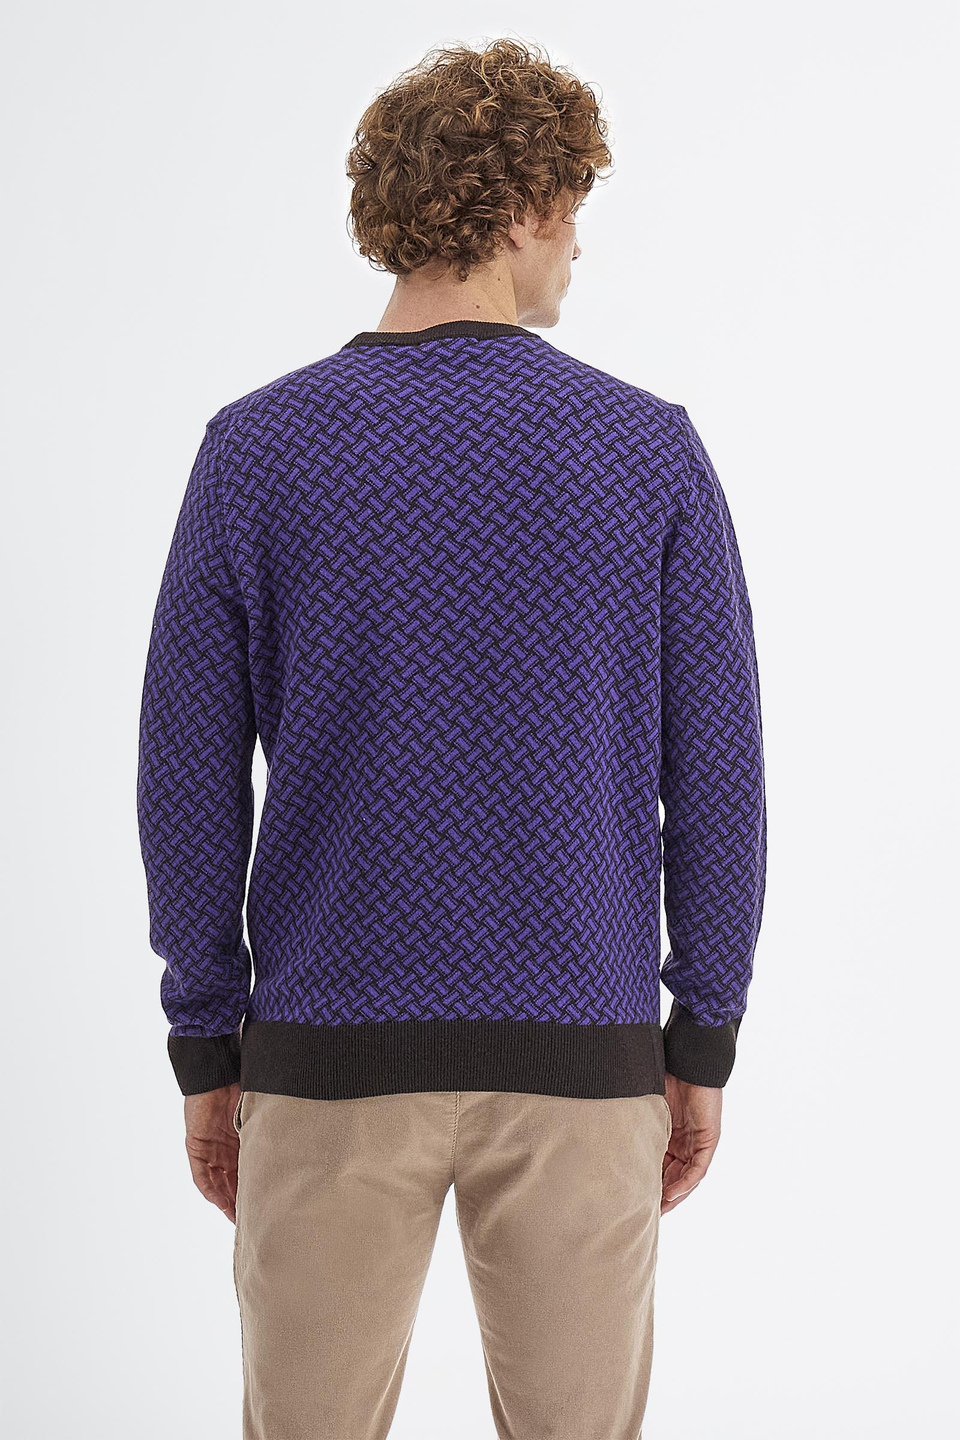 Men’s crew neck sweater Argentina with long sleeves in regular fit cashmere merino wool blend | La Martina - Official Online Shop